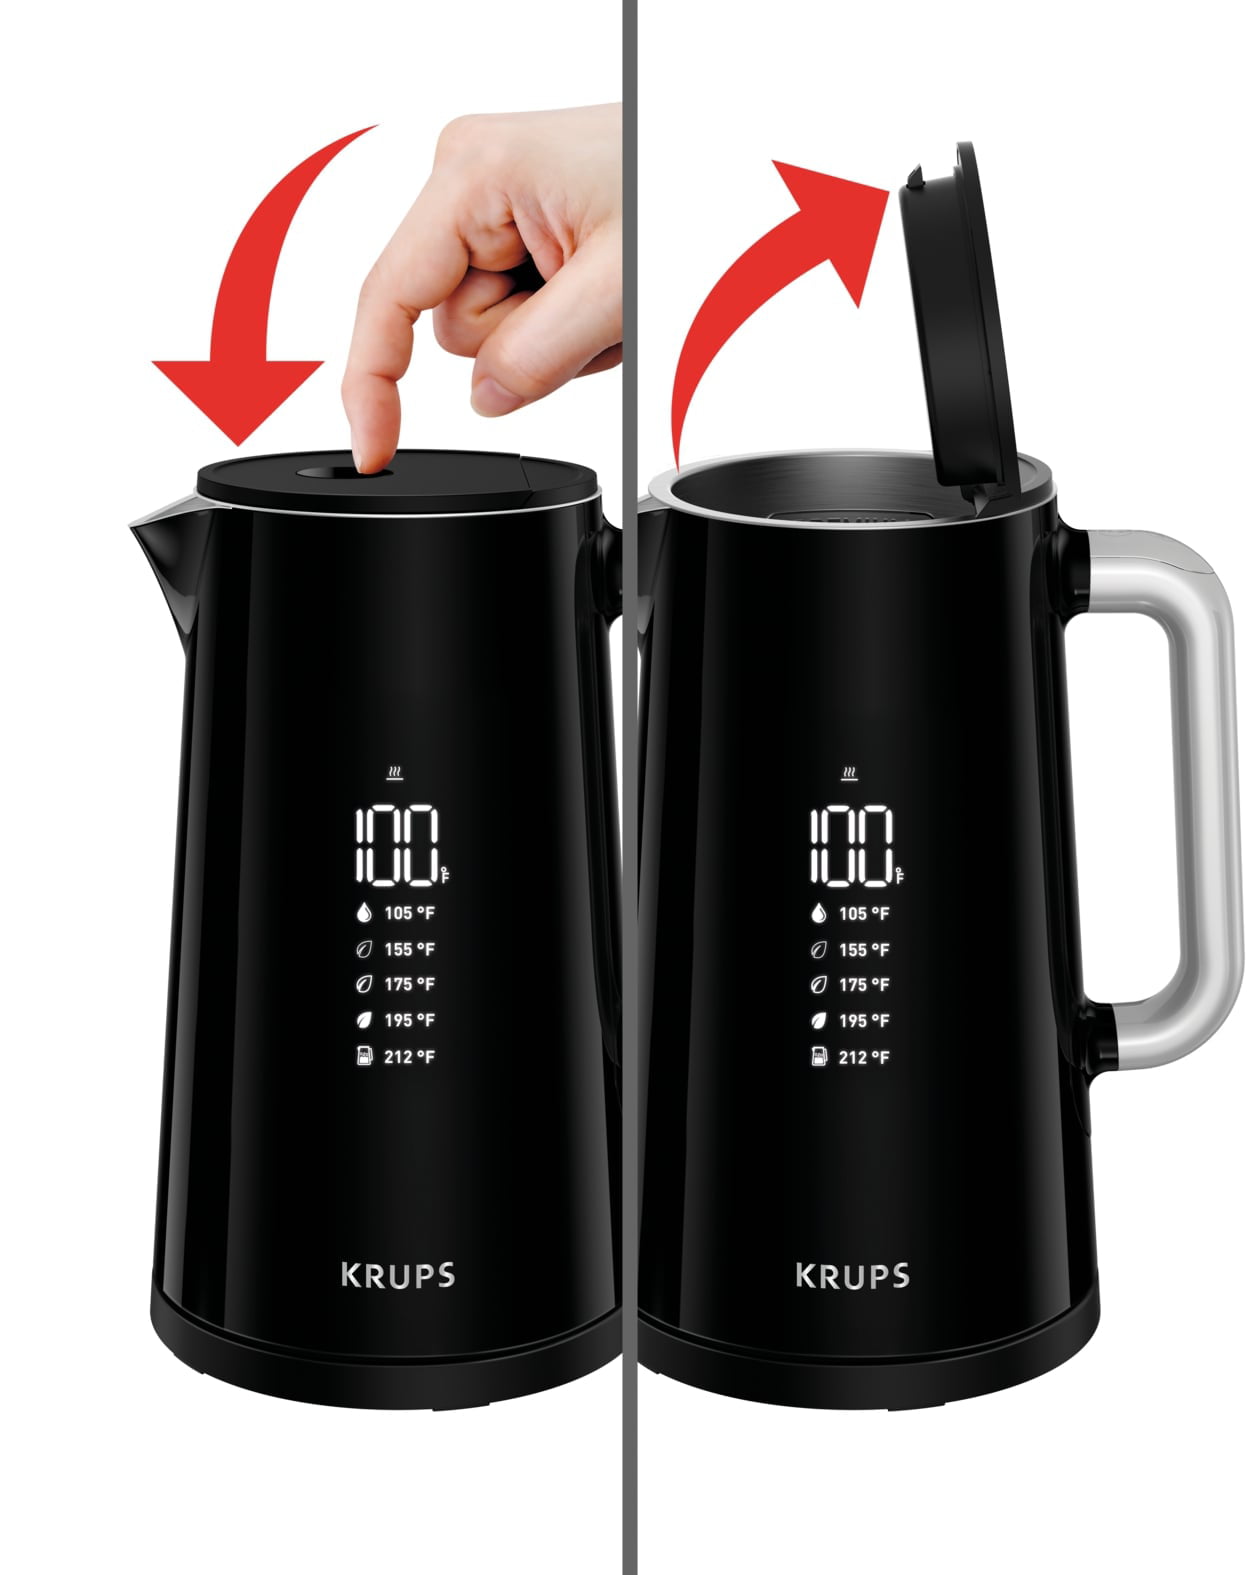  Krups Glass Electric Kettle 1.7 Liter LED Indicator, Anti Scale  Filter, 1500 Watts Digital Control, Double Wall, Fast Boiling, Auto Off,  Keep Warm, Cordless: Home & Kitchen